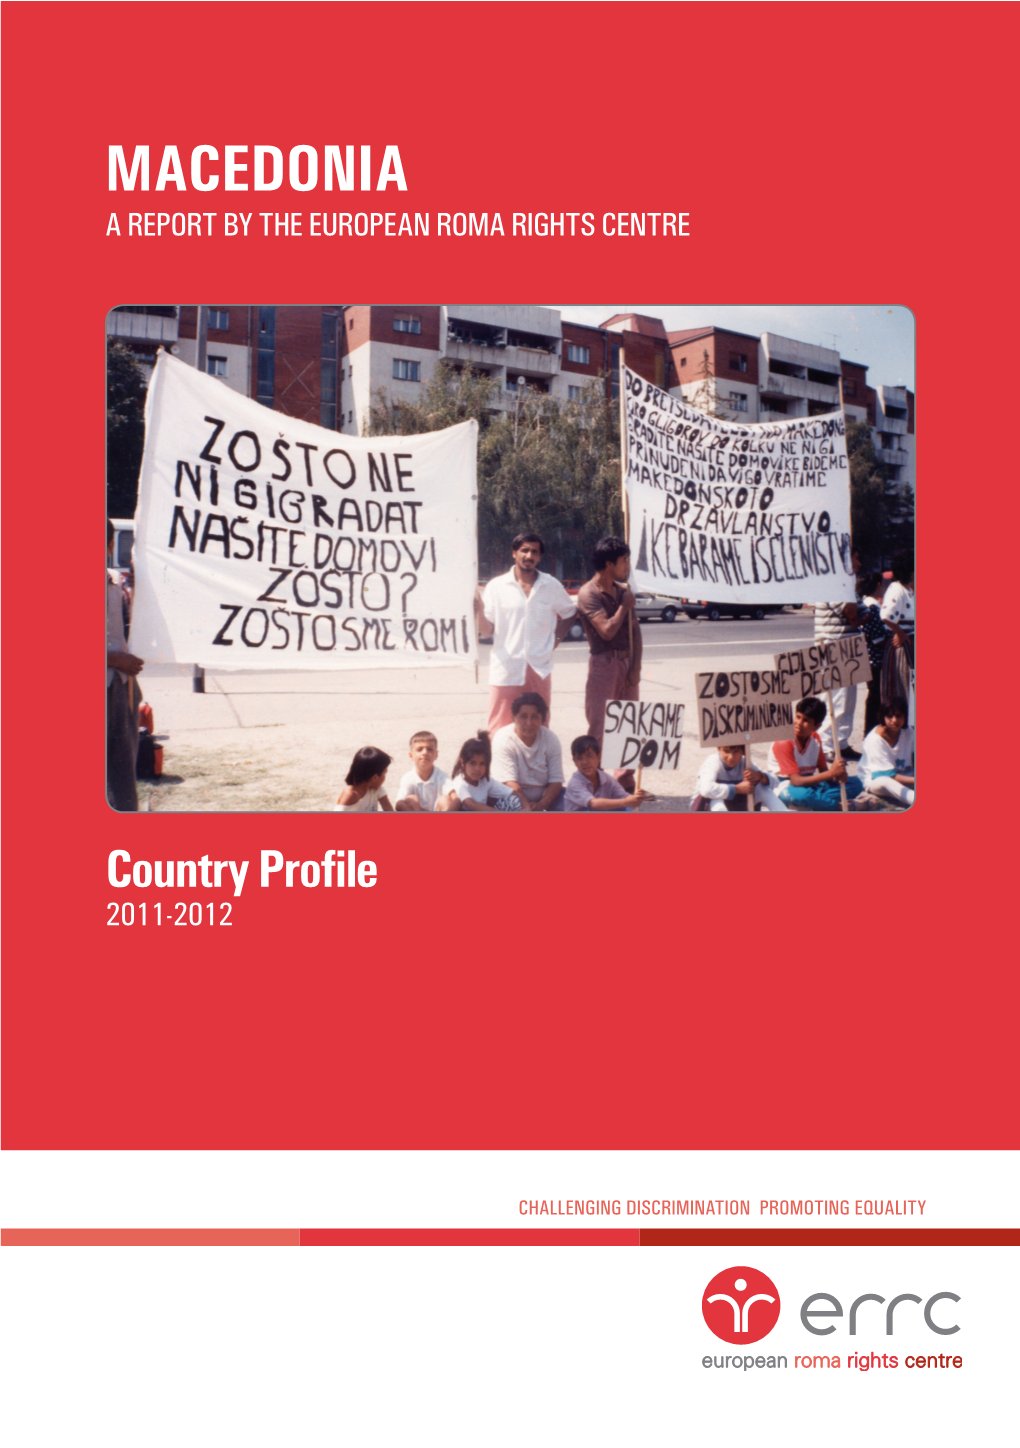 Macedonia: a Report by the European Roma Rights Centre